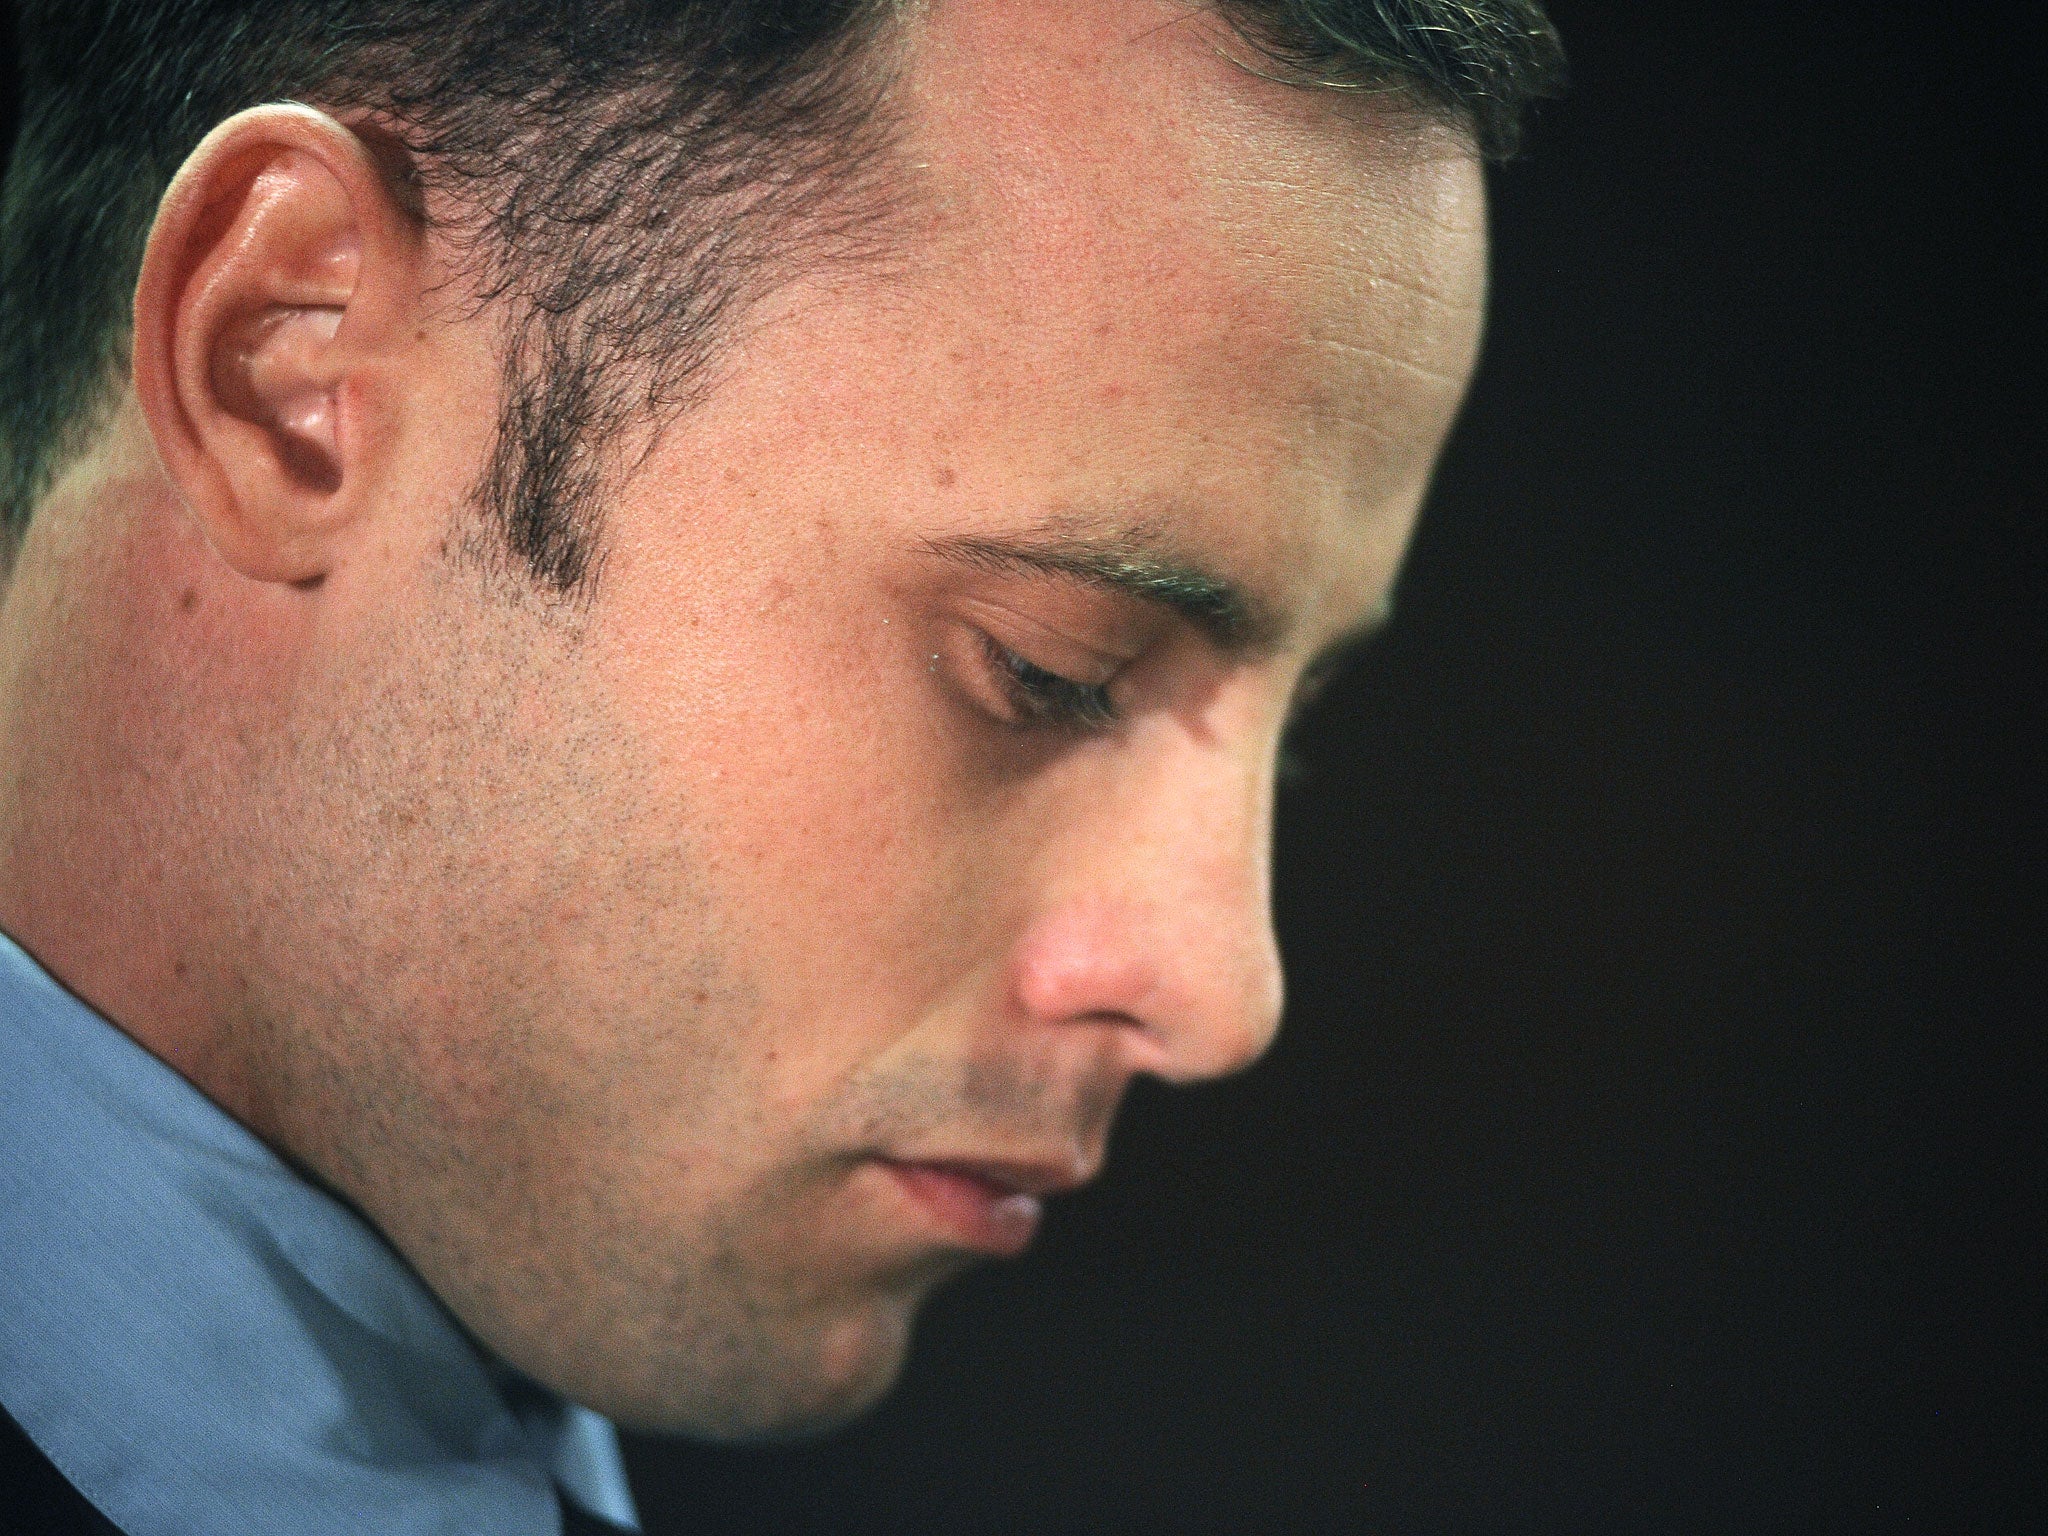 Oscar Pistorius has been fined for unpaid taxes revealed during his ongoing murder trial